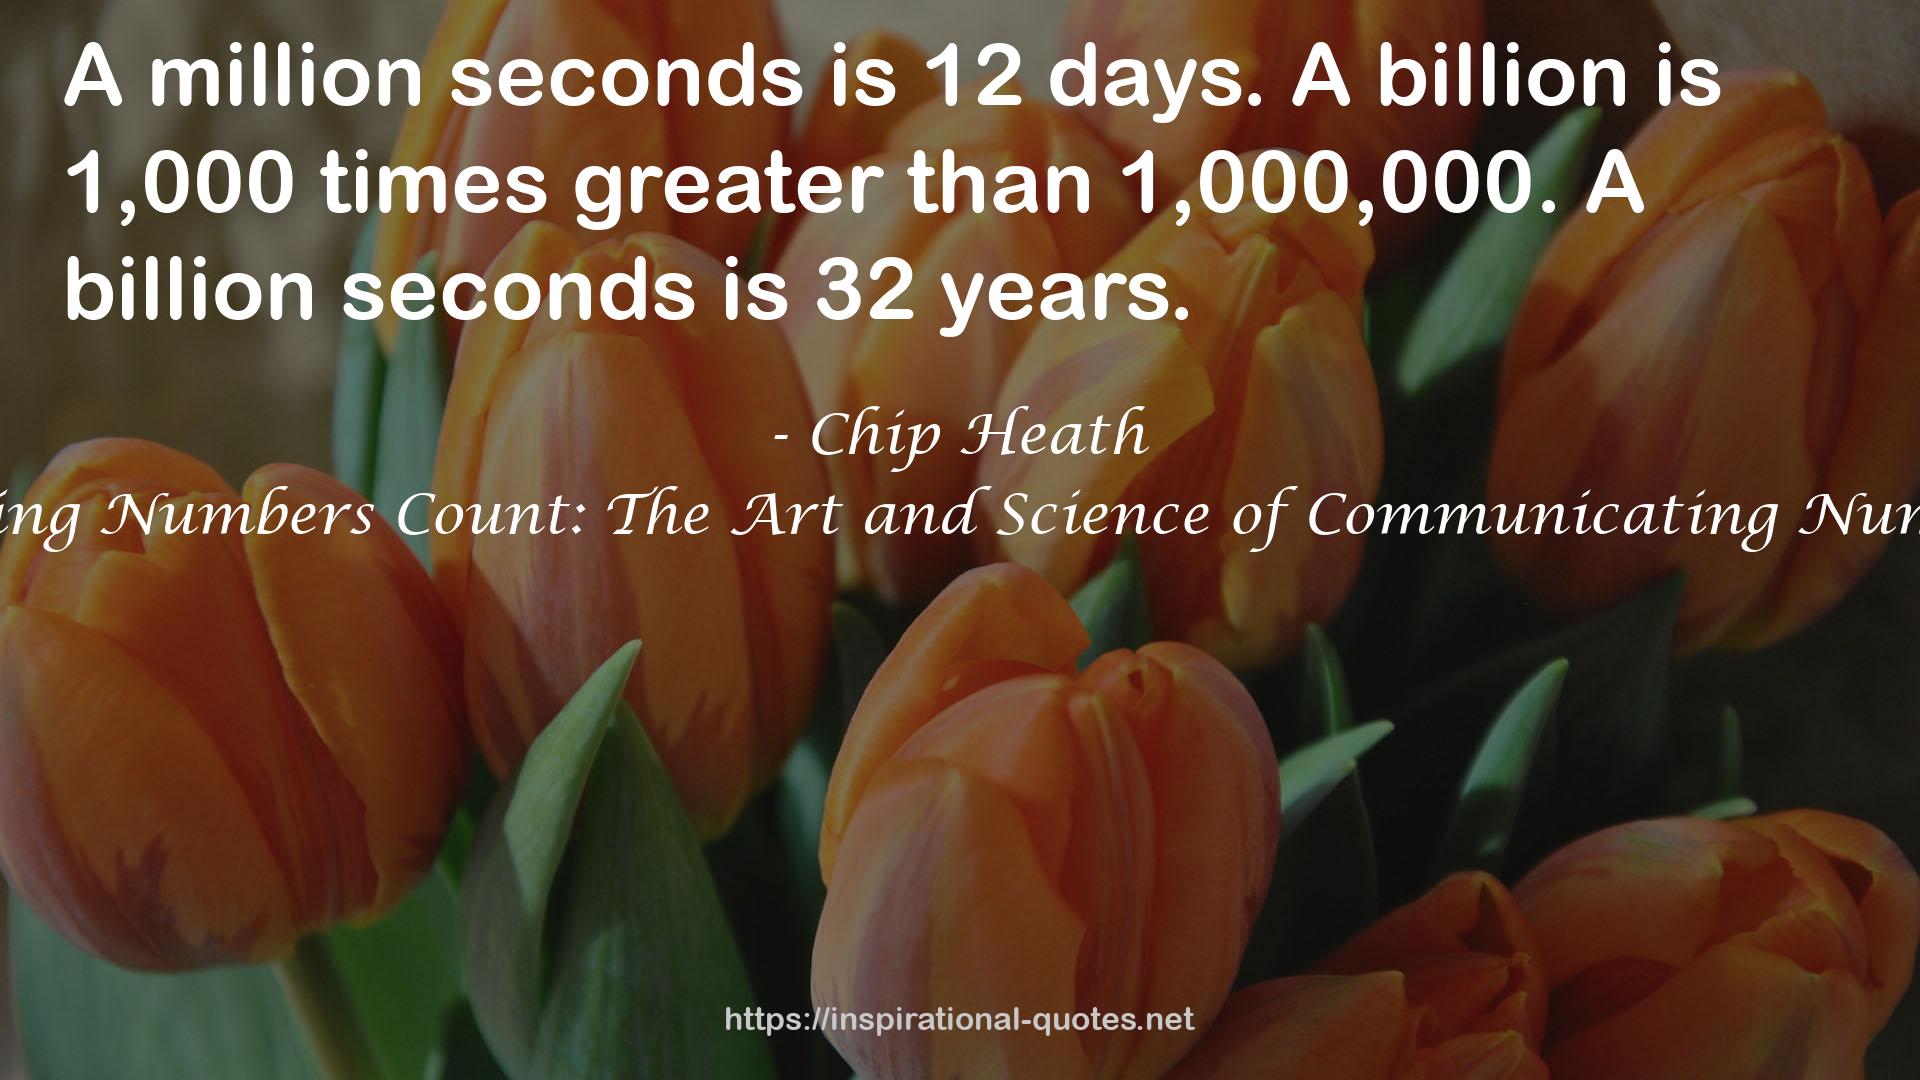 Making Numbers Count: The Art and Science of Communicating Numbers QUOTES